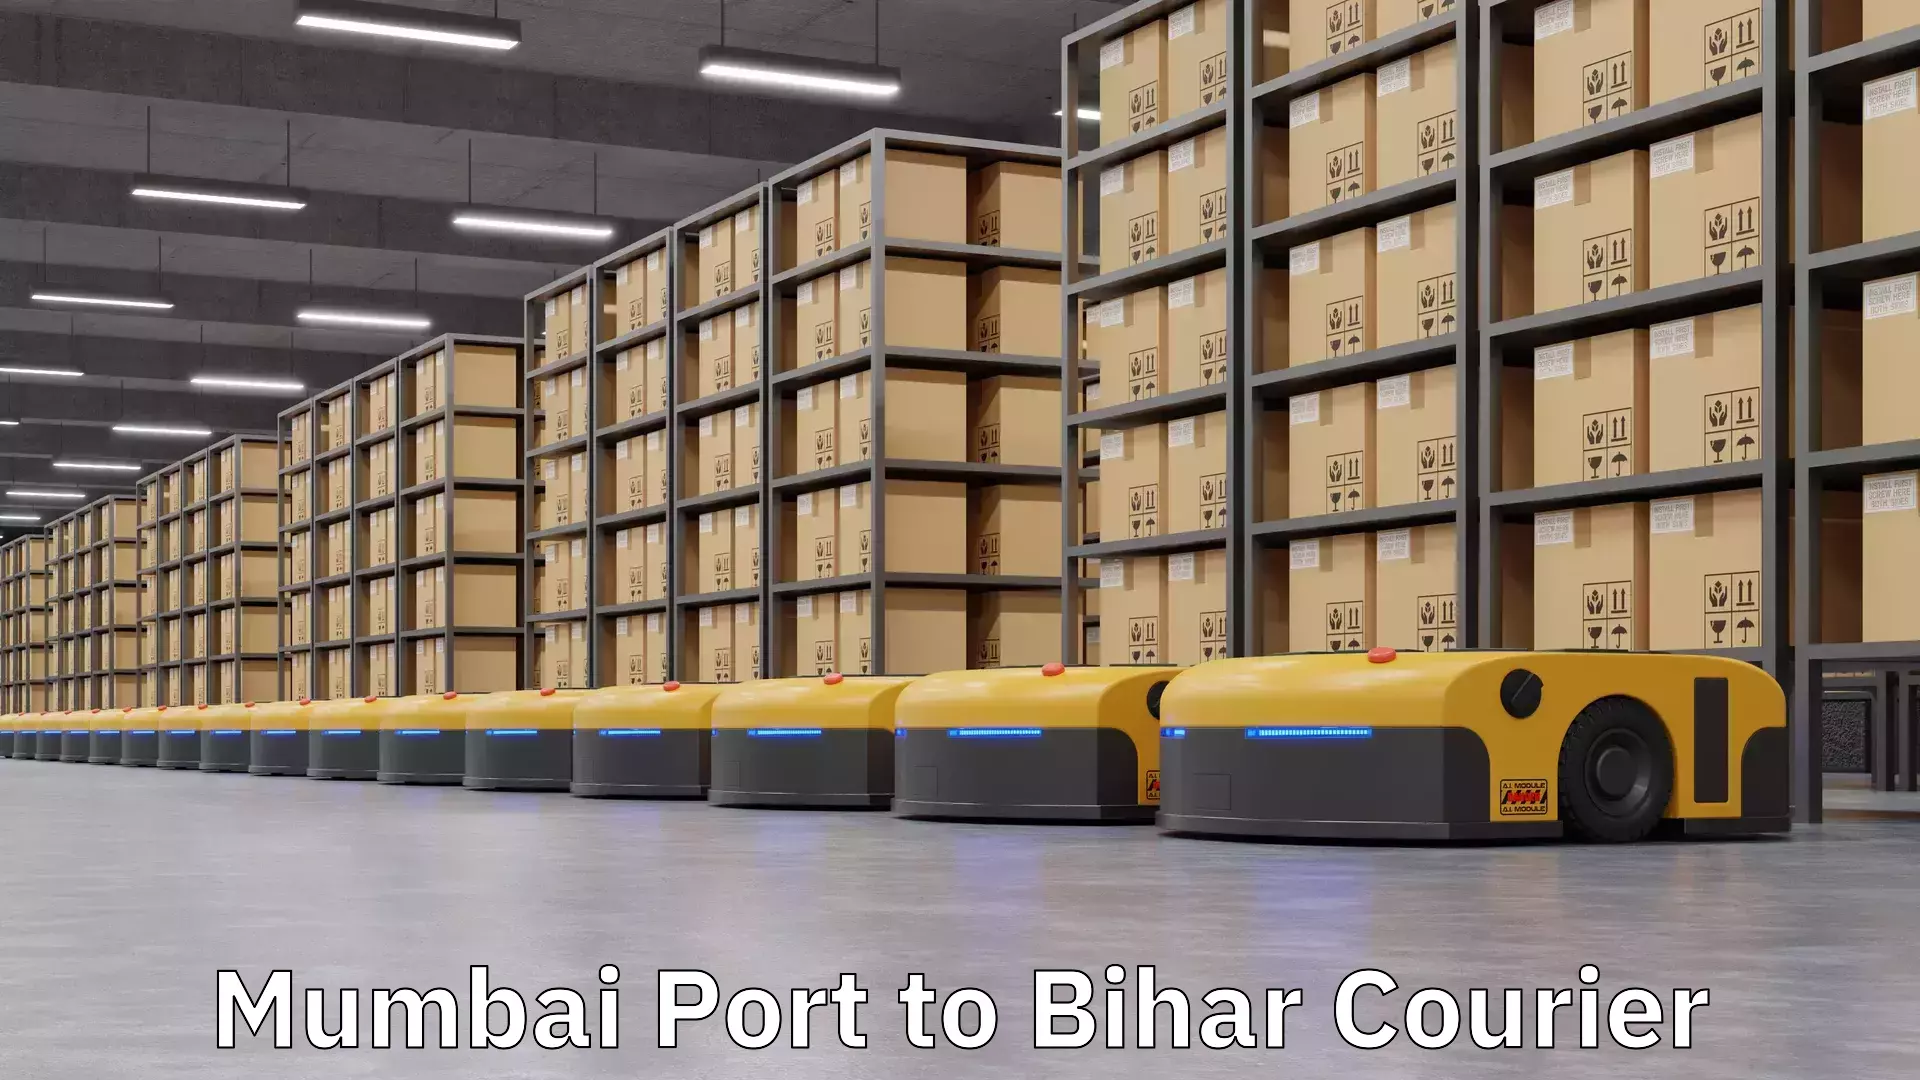 Efficient package consolidation in Mumbai Port to Bihar